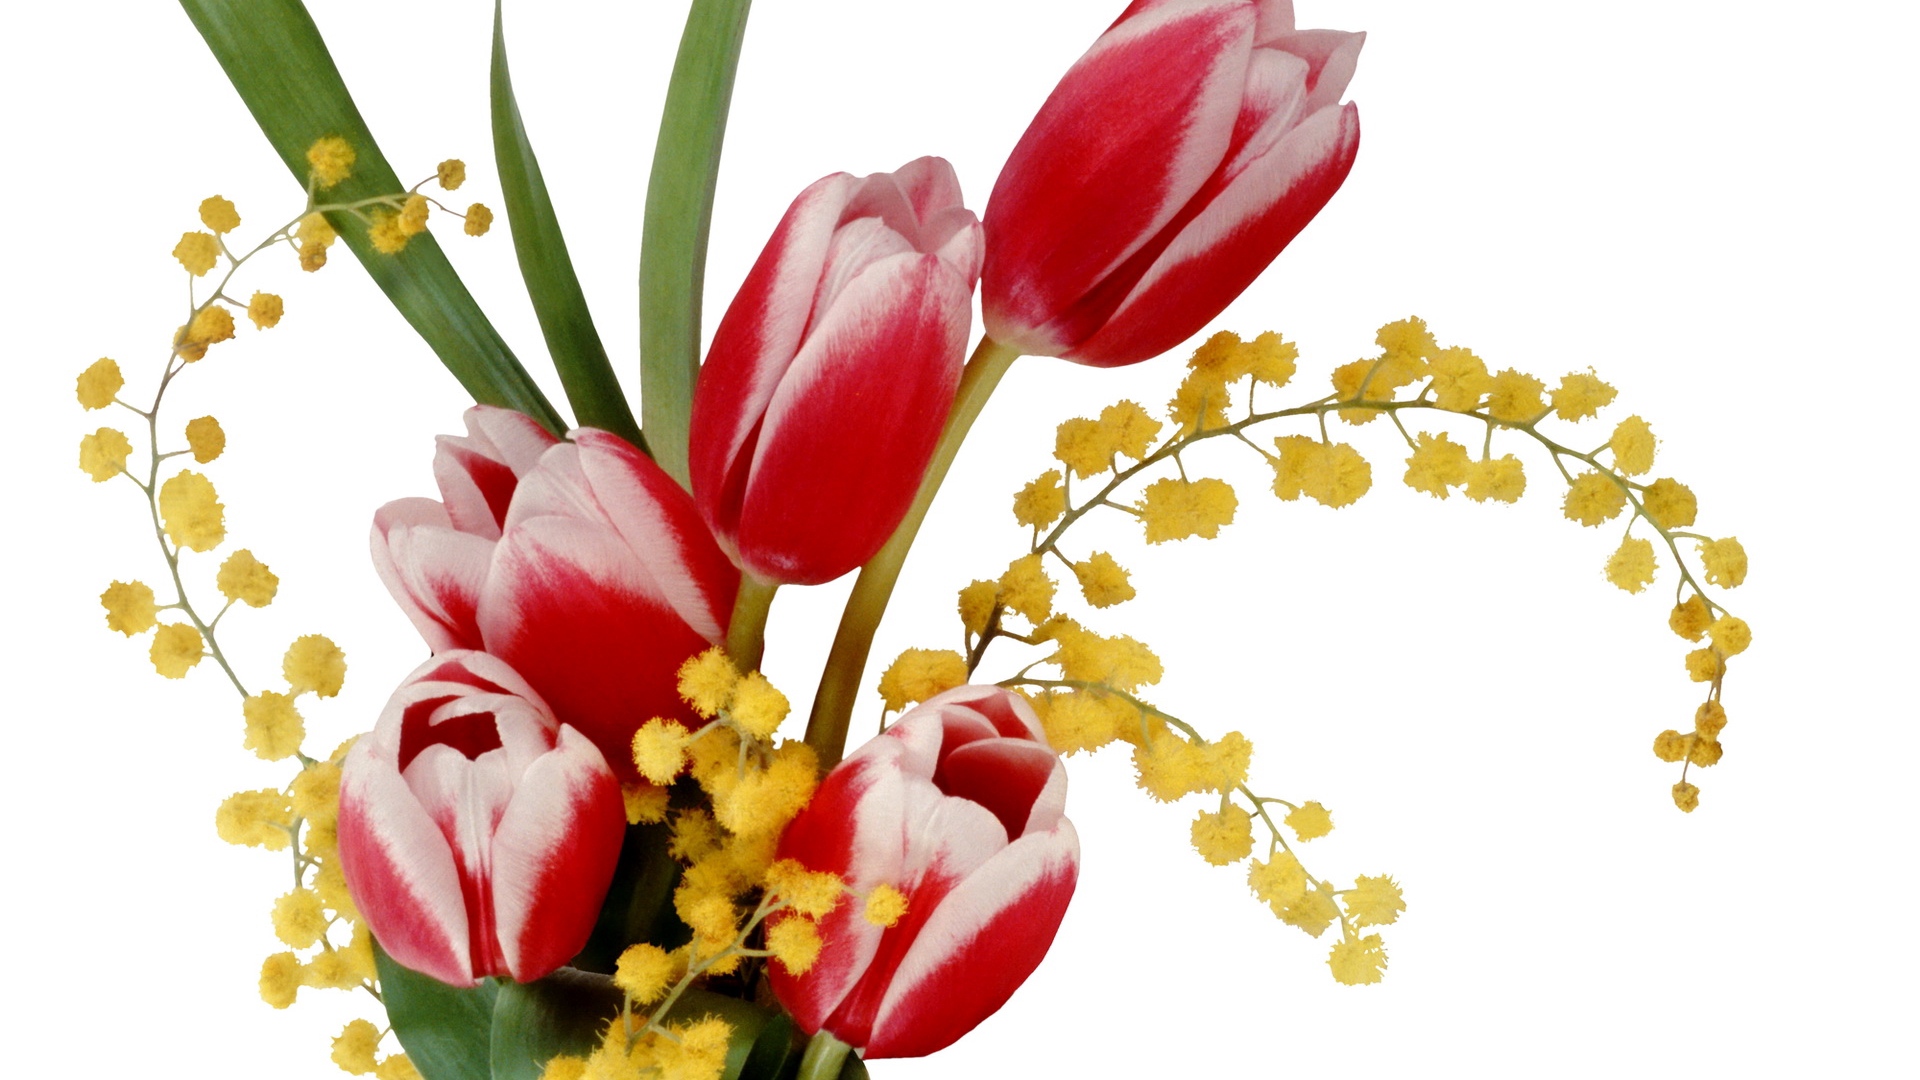 Wallpaper Tulips, Colorful, Mimosa, Flower, Spring - High Resolution Picture Of Flowers - HD Wallpaper 